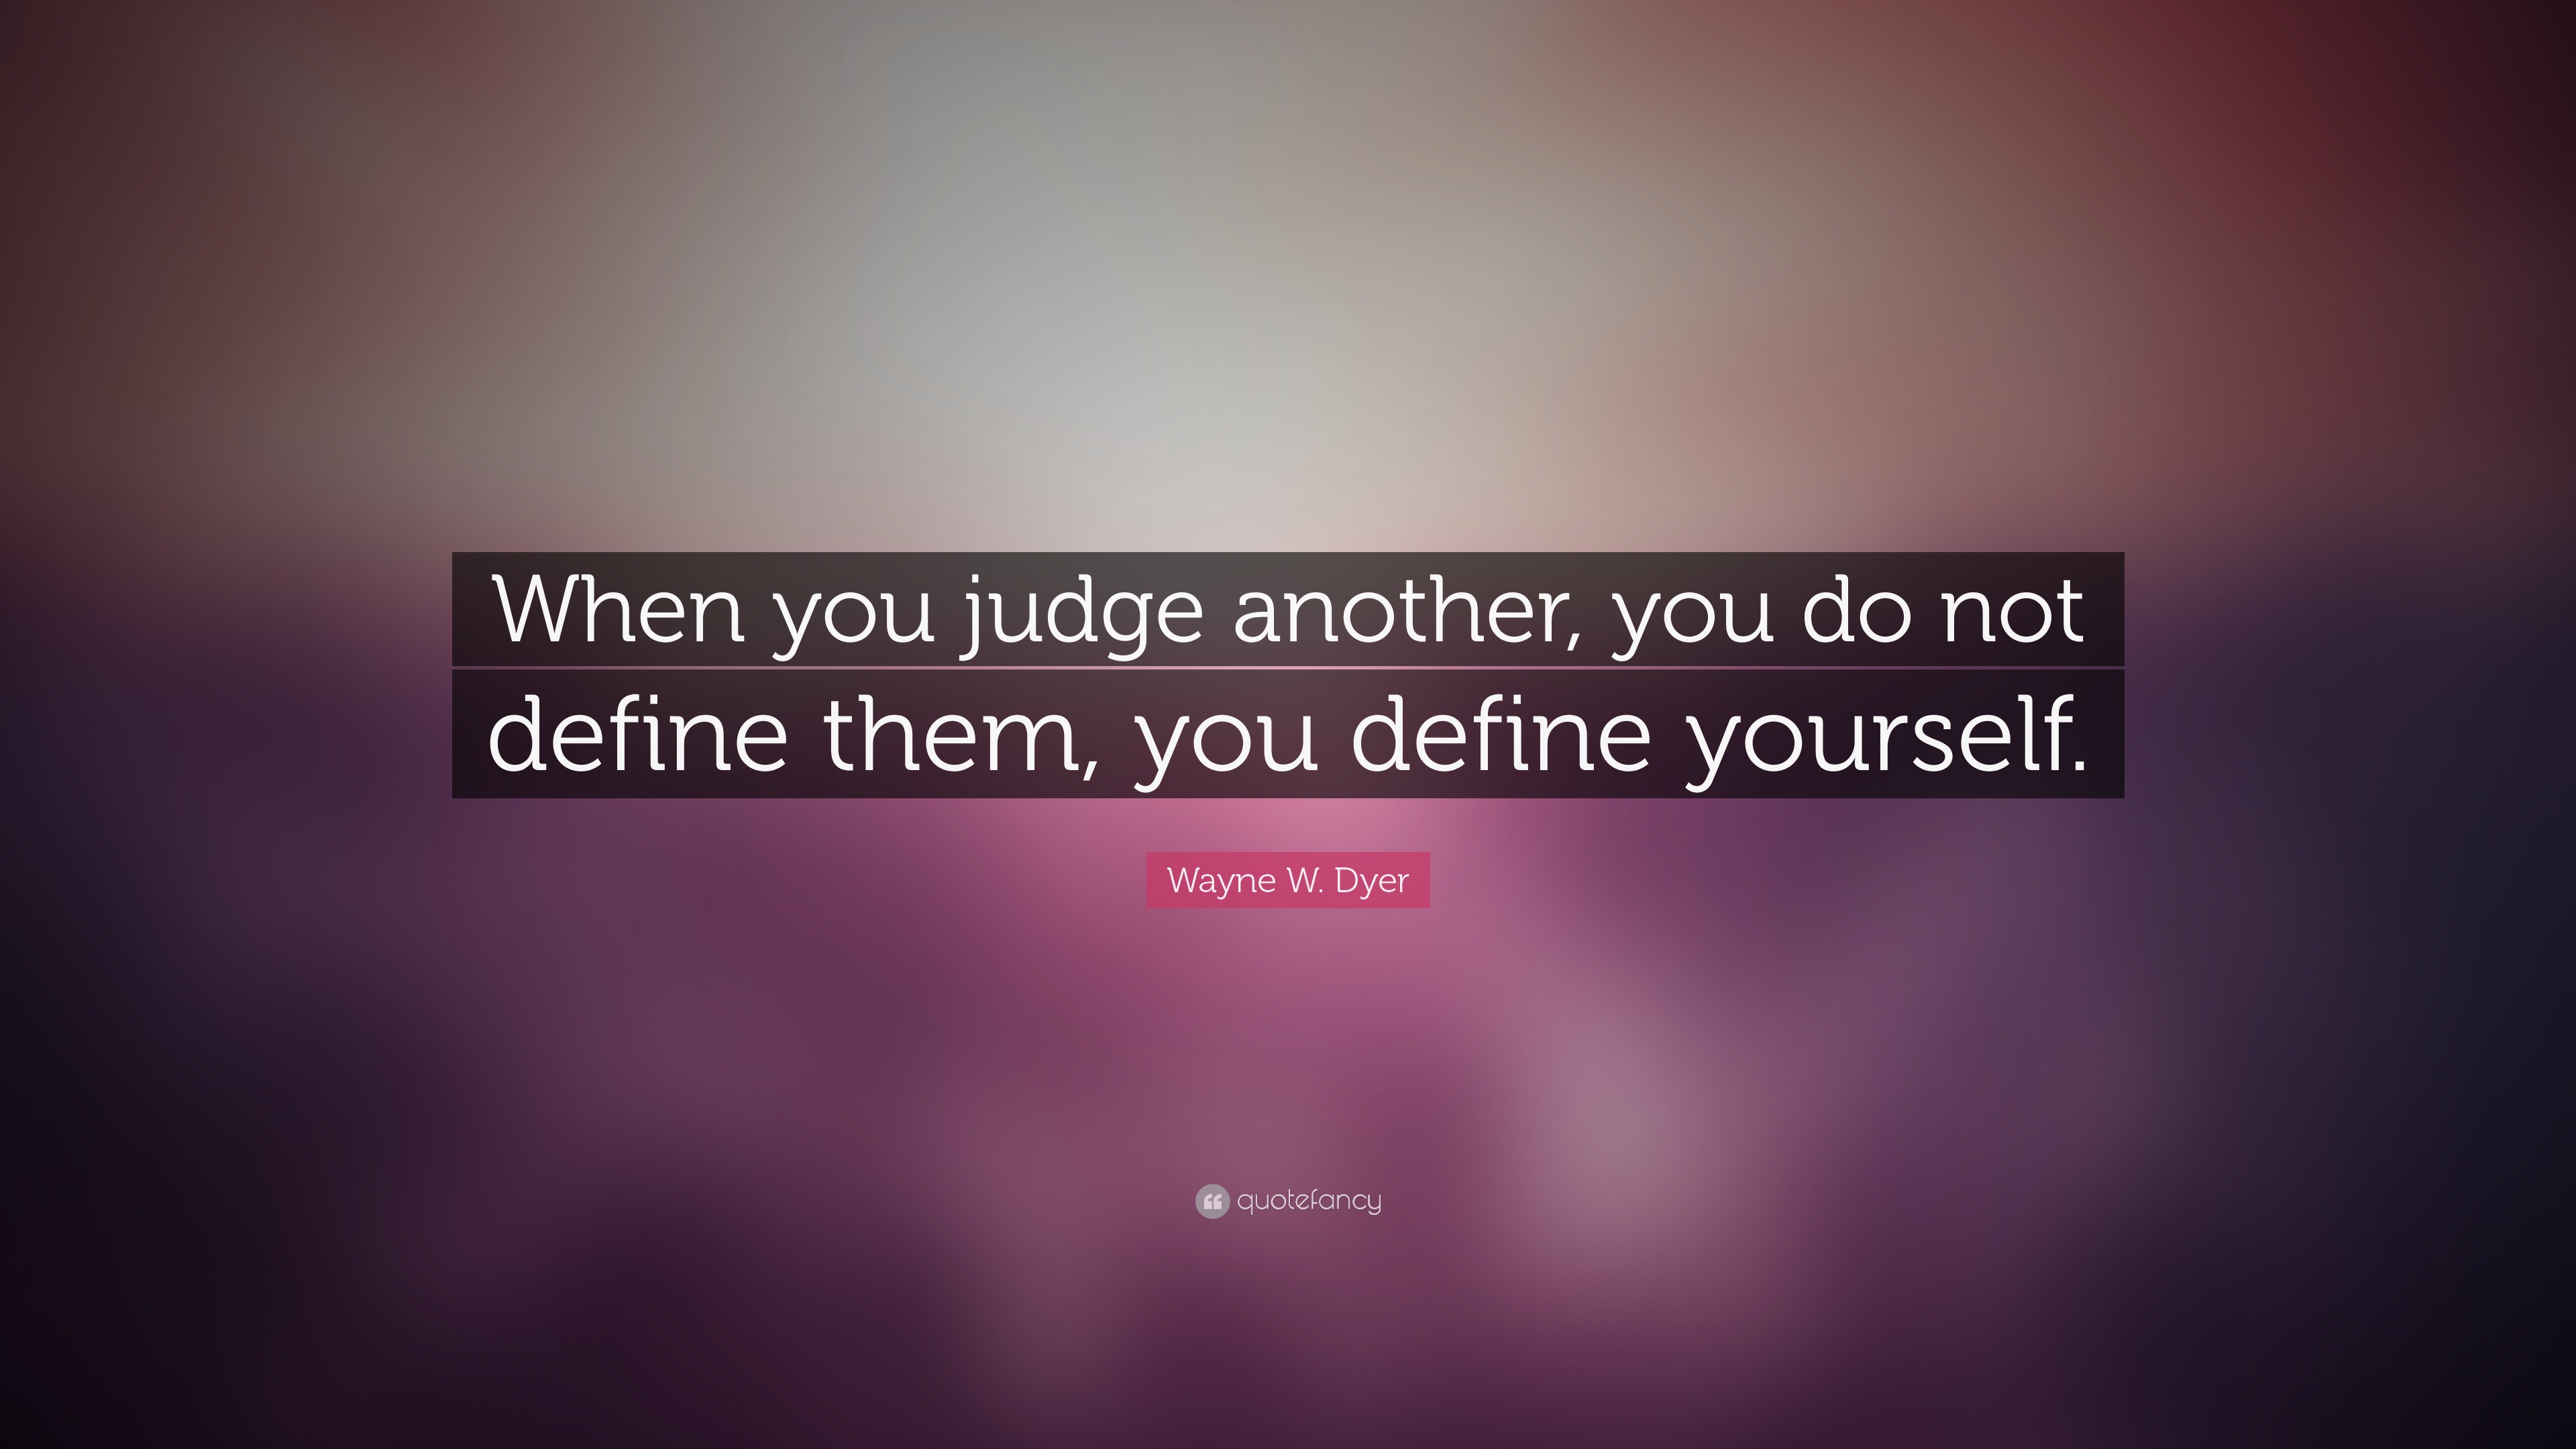 Wayne-W-Dyer-Quote-When-you-judge-another-you-do-not-define-them.jpg